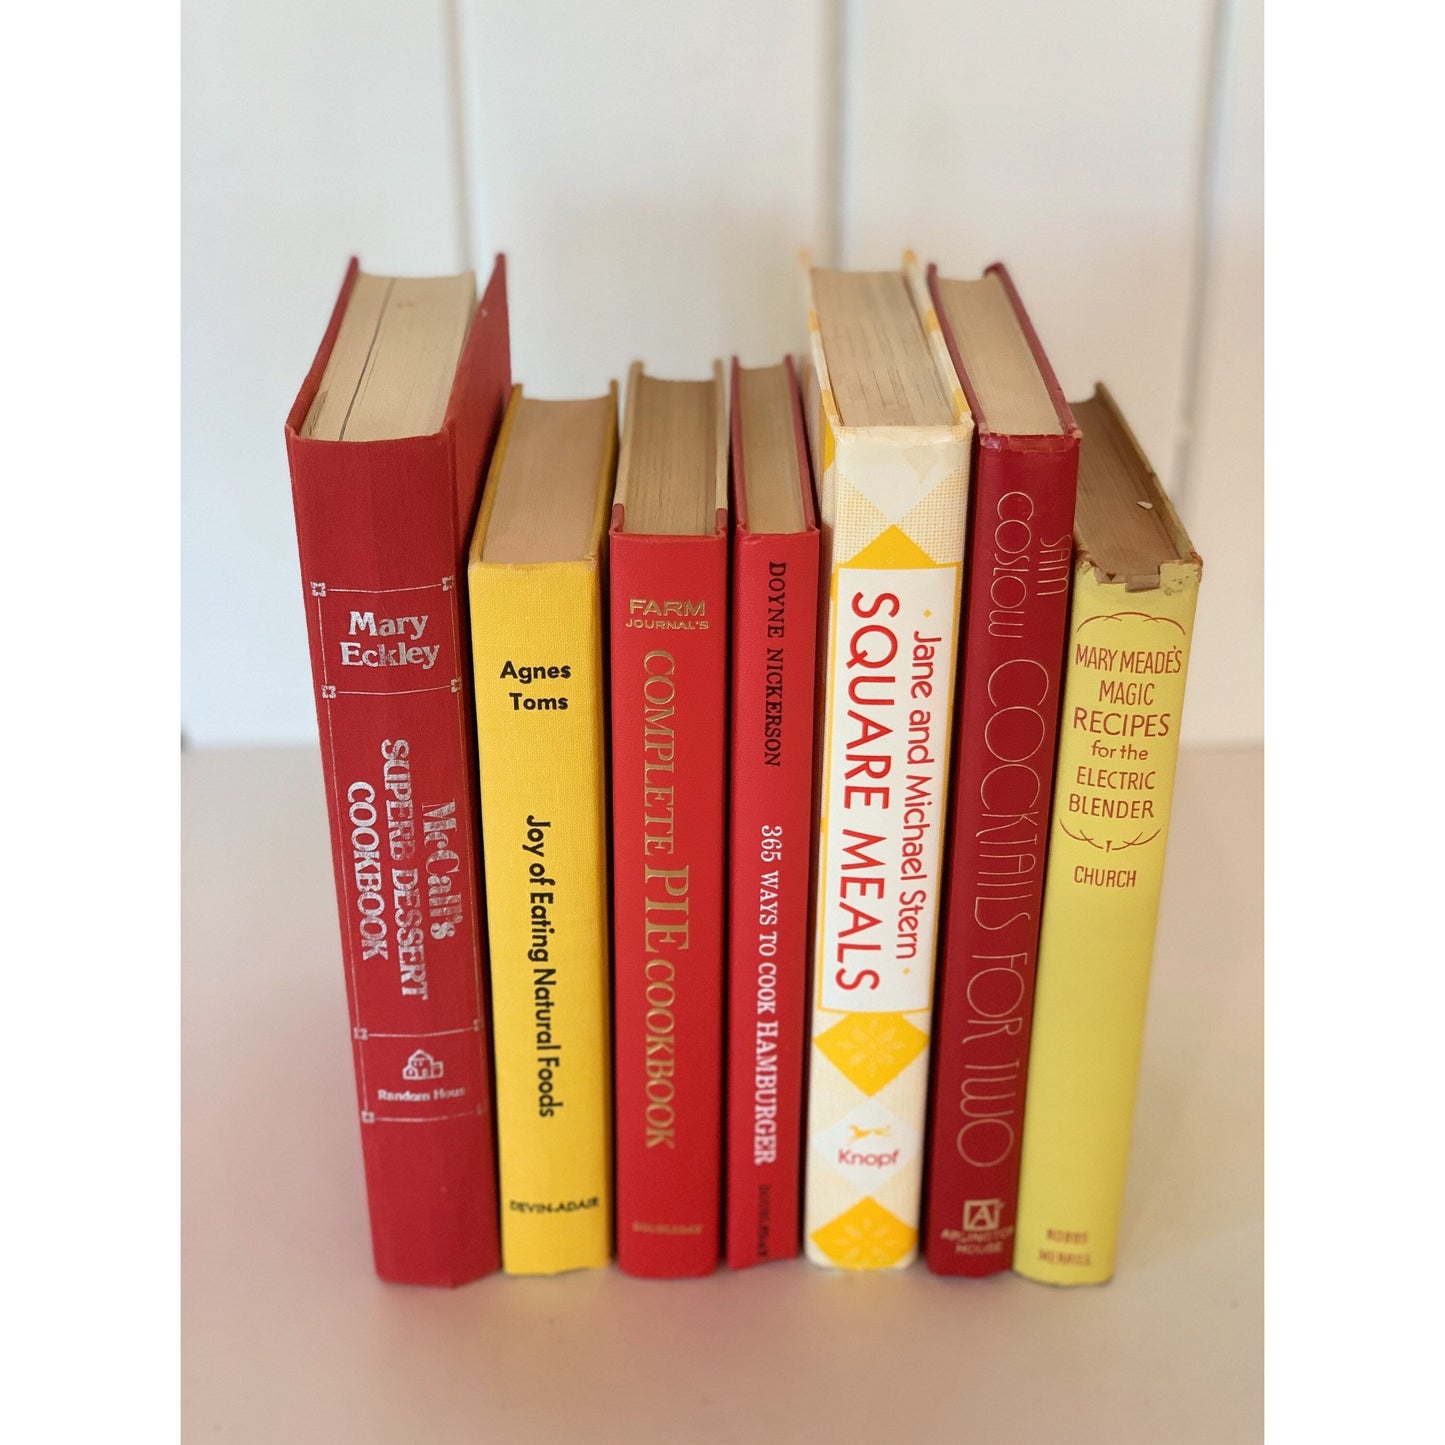 Red and Yellow Vintage Cookbook Set - Decorative Books for Kitchen Decor